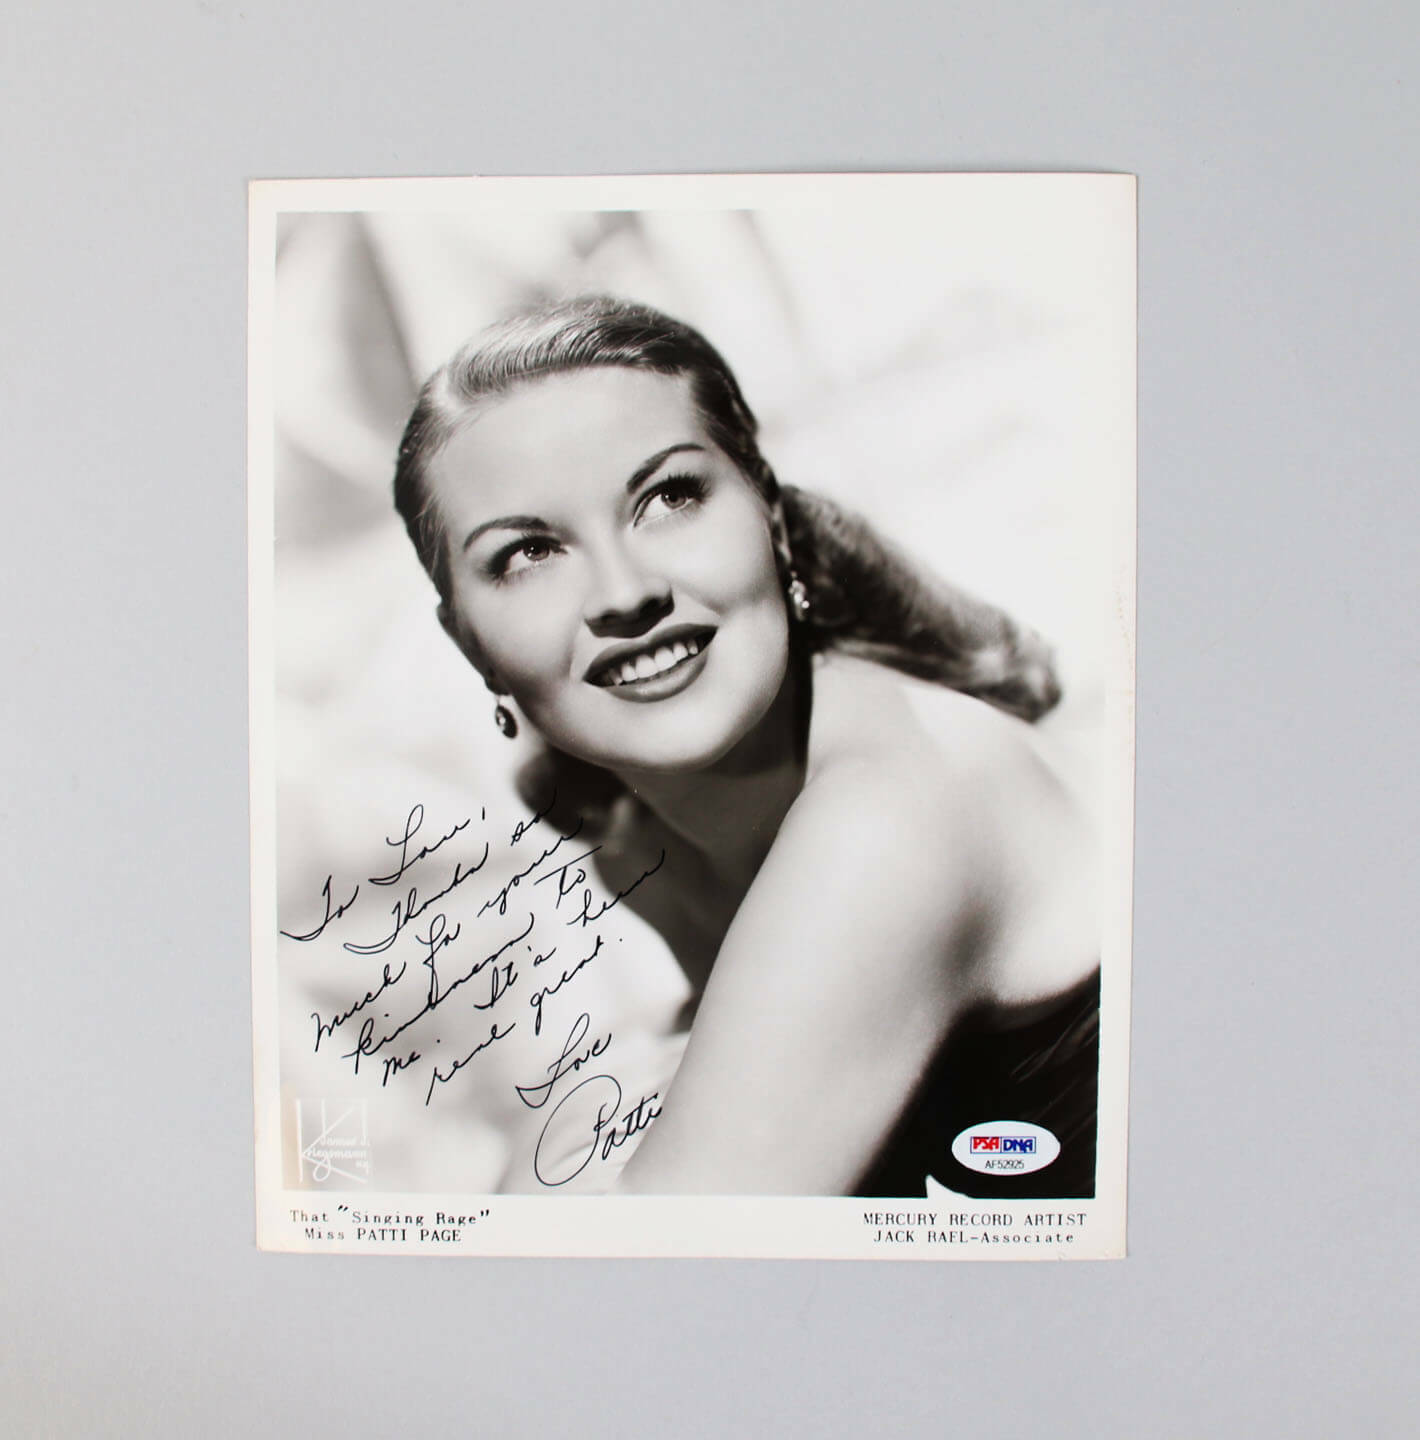 Patti Page Signed Photo Poster painting 8x10 - COA PSA/DNA